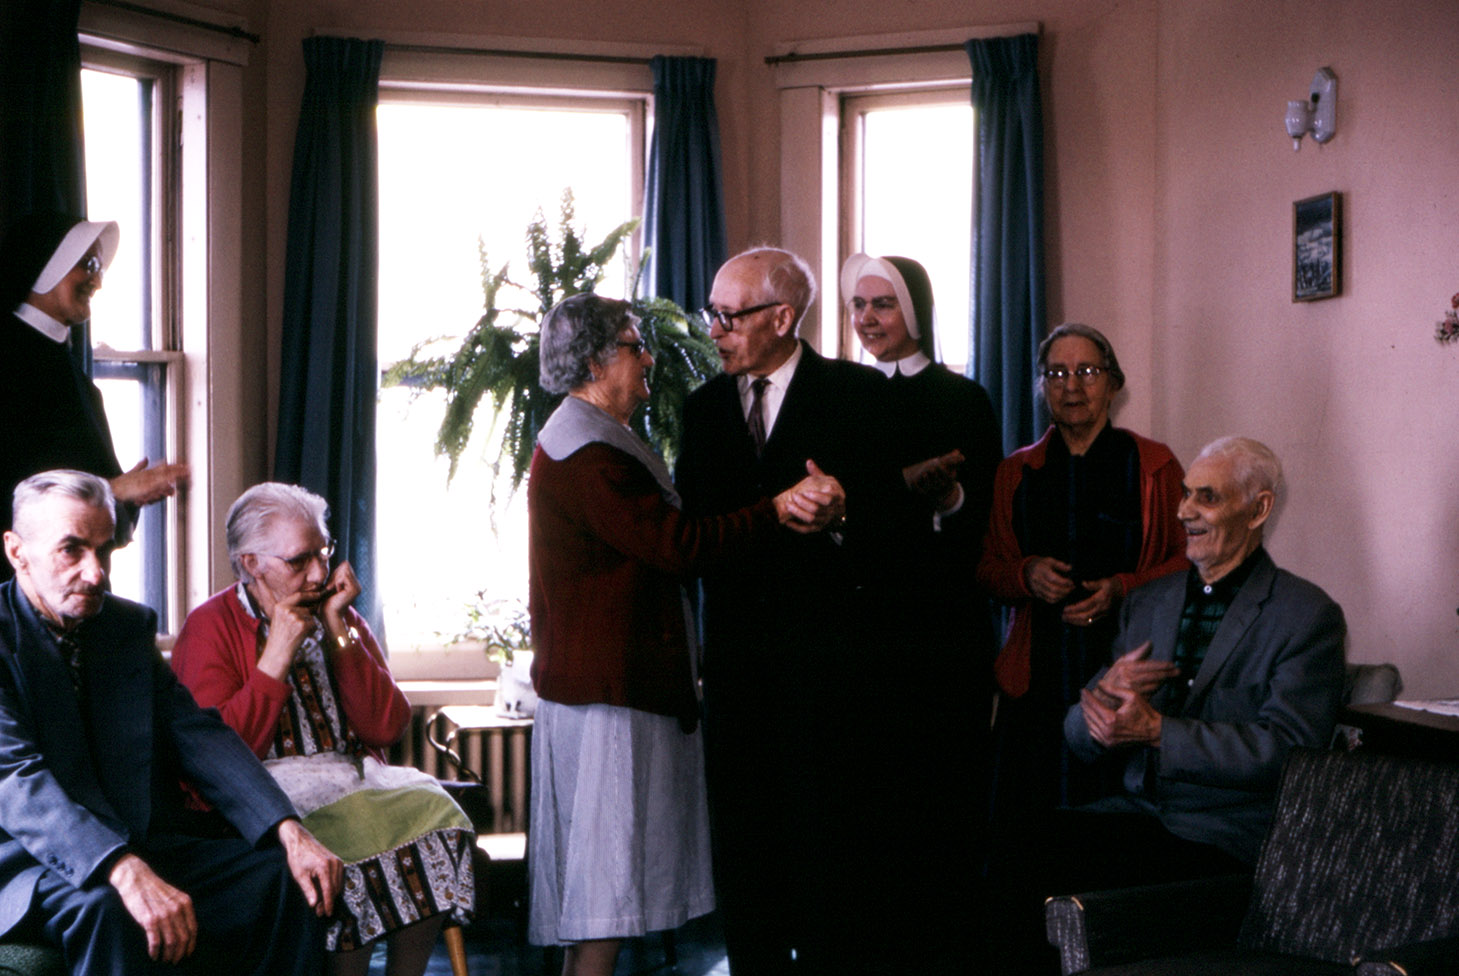 communityalbums - Elderly guests dance to the music of the mouth organ as Sisters of Charity-Halifax watch, Stella Maris Residence, North Sydney, Nova Scotia.